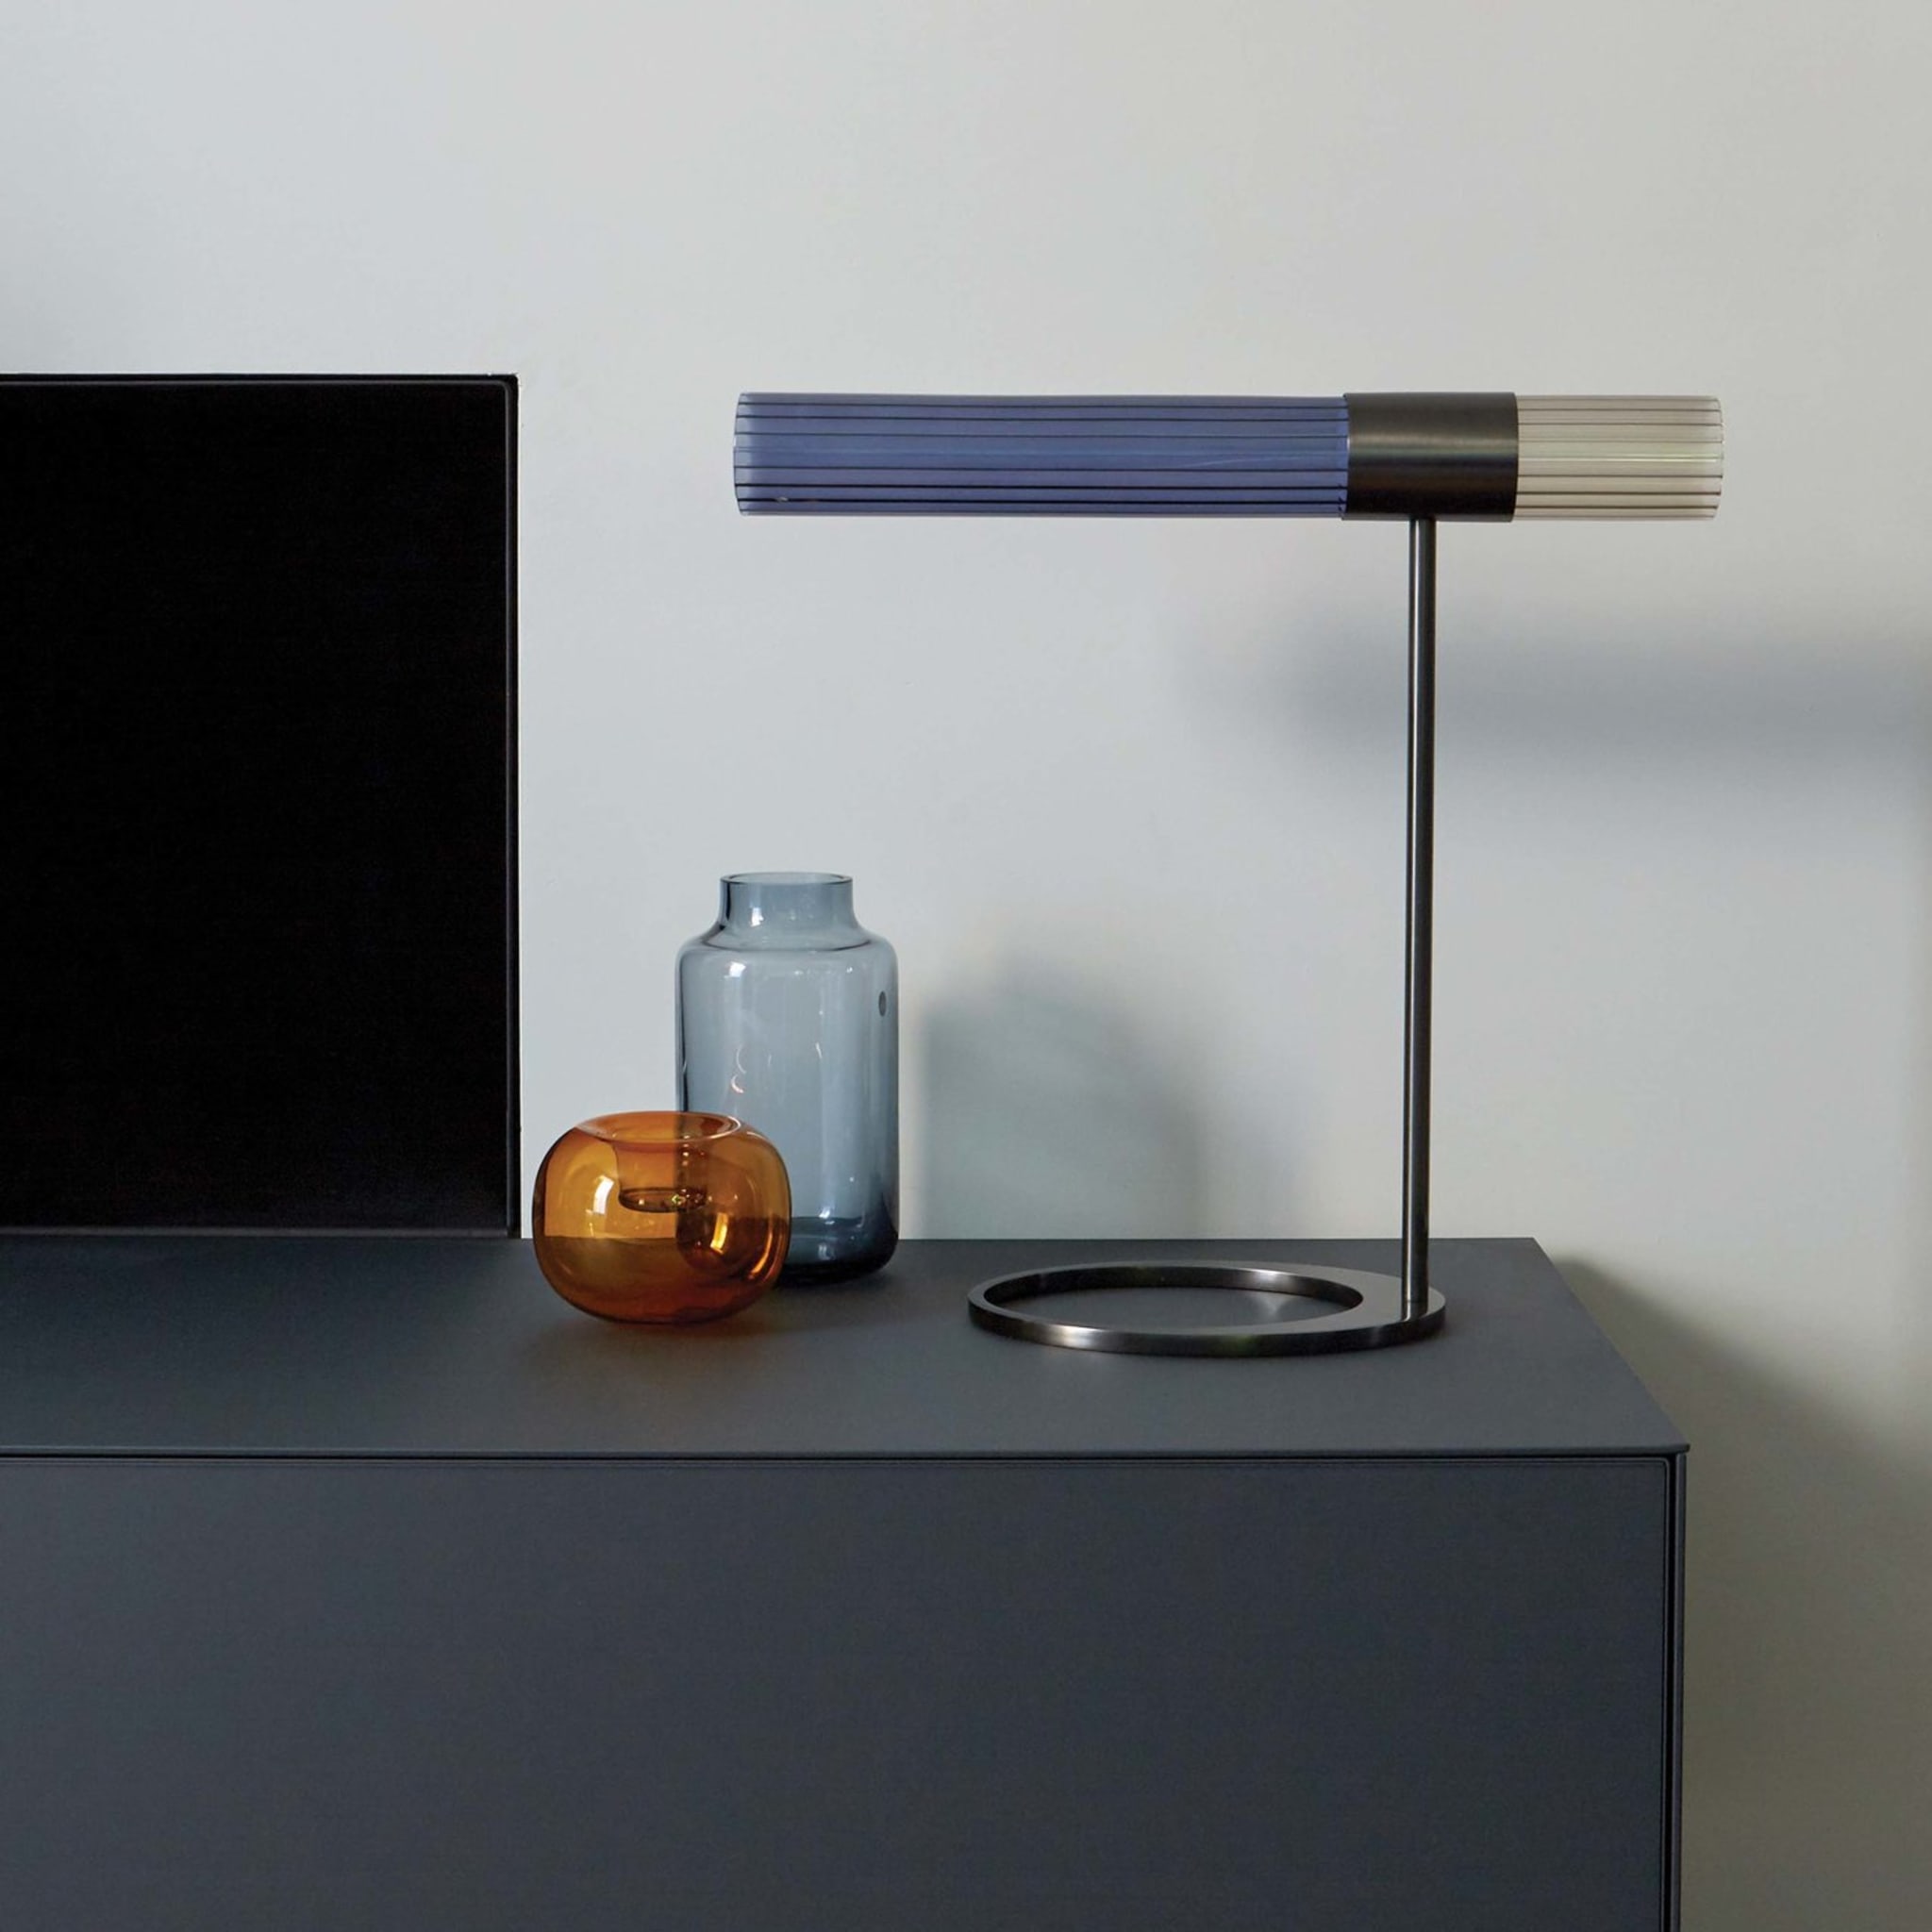 Sbarlusc Brass and Blue Glass Table Lamp - Alternative view 1